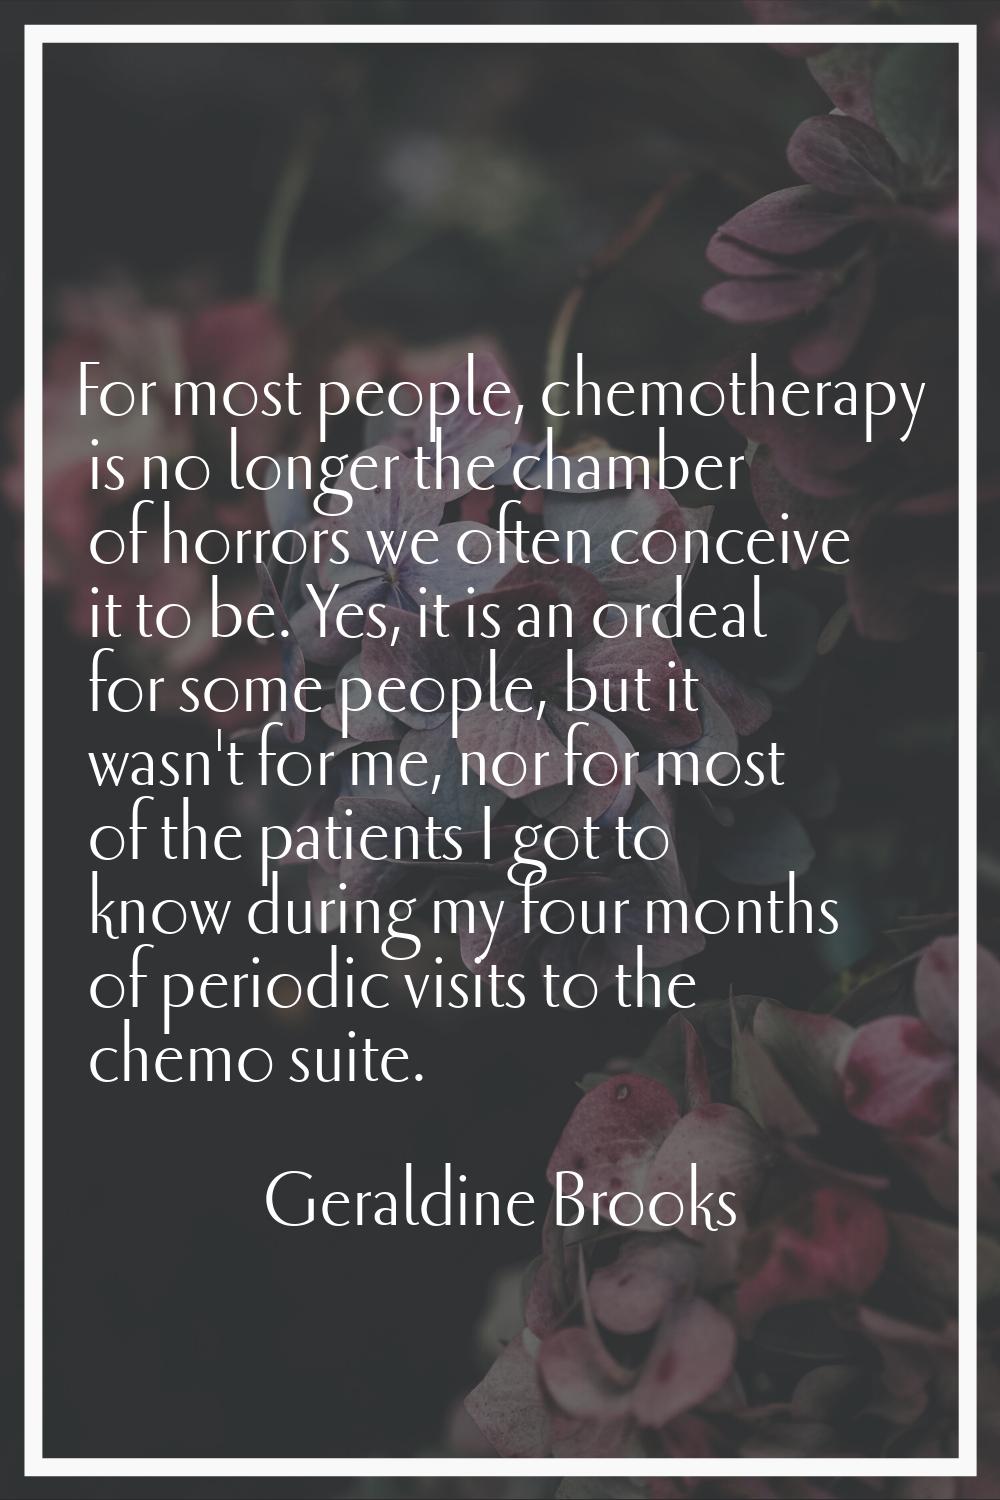 For most people, chemotherapy is no longer the chamber of horrors we often conceive it to be. Yes, 